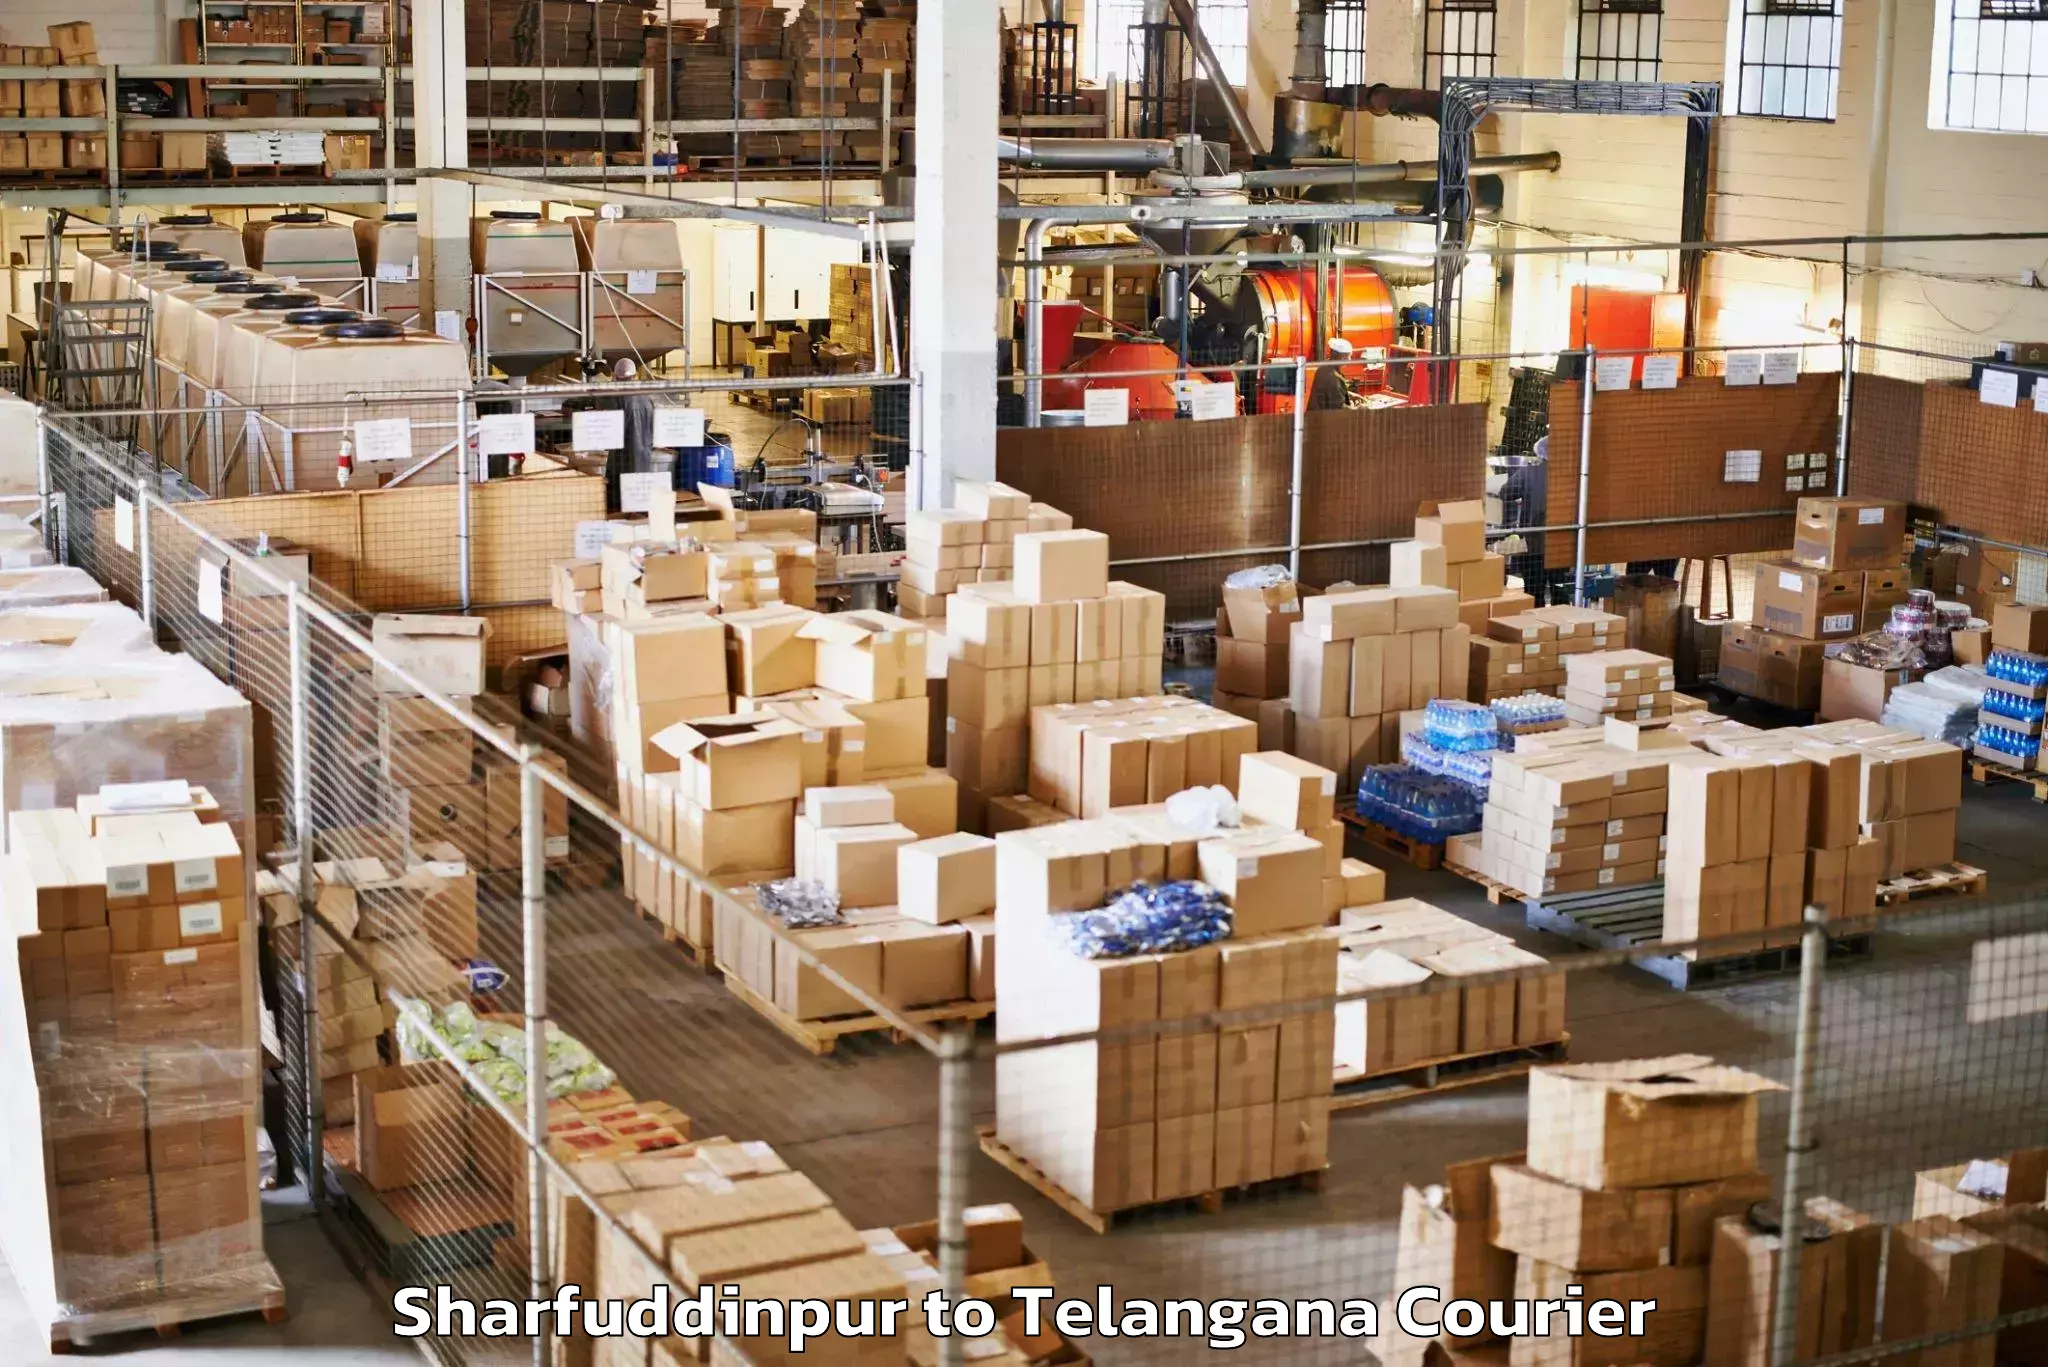 Excess baggage transport Sharfuddinpur to Siddipet